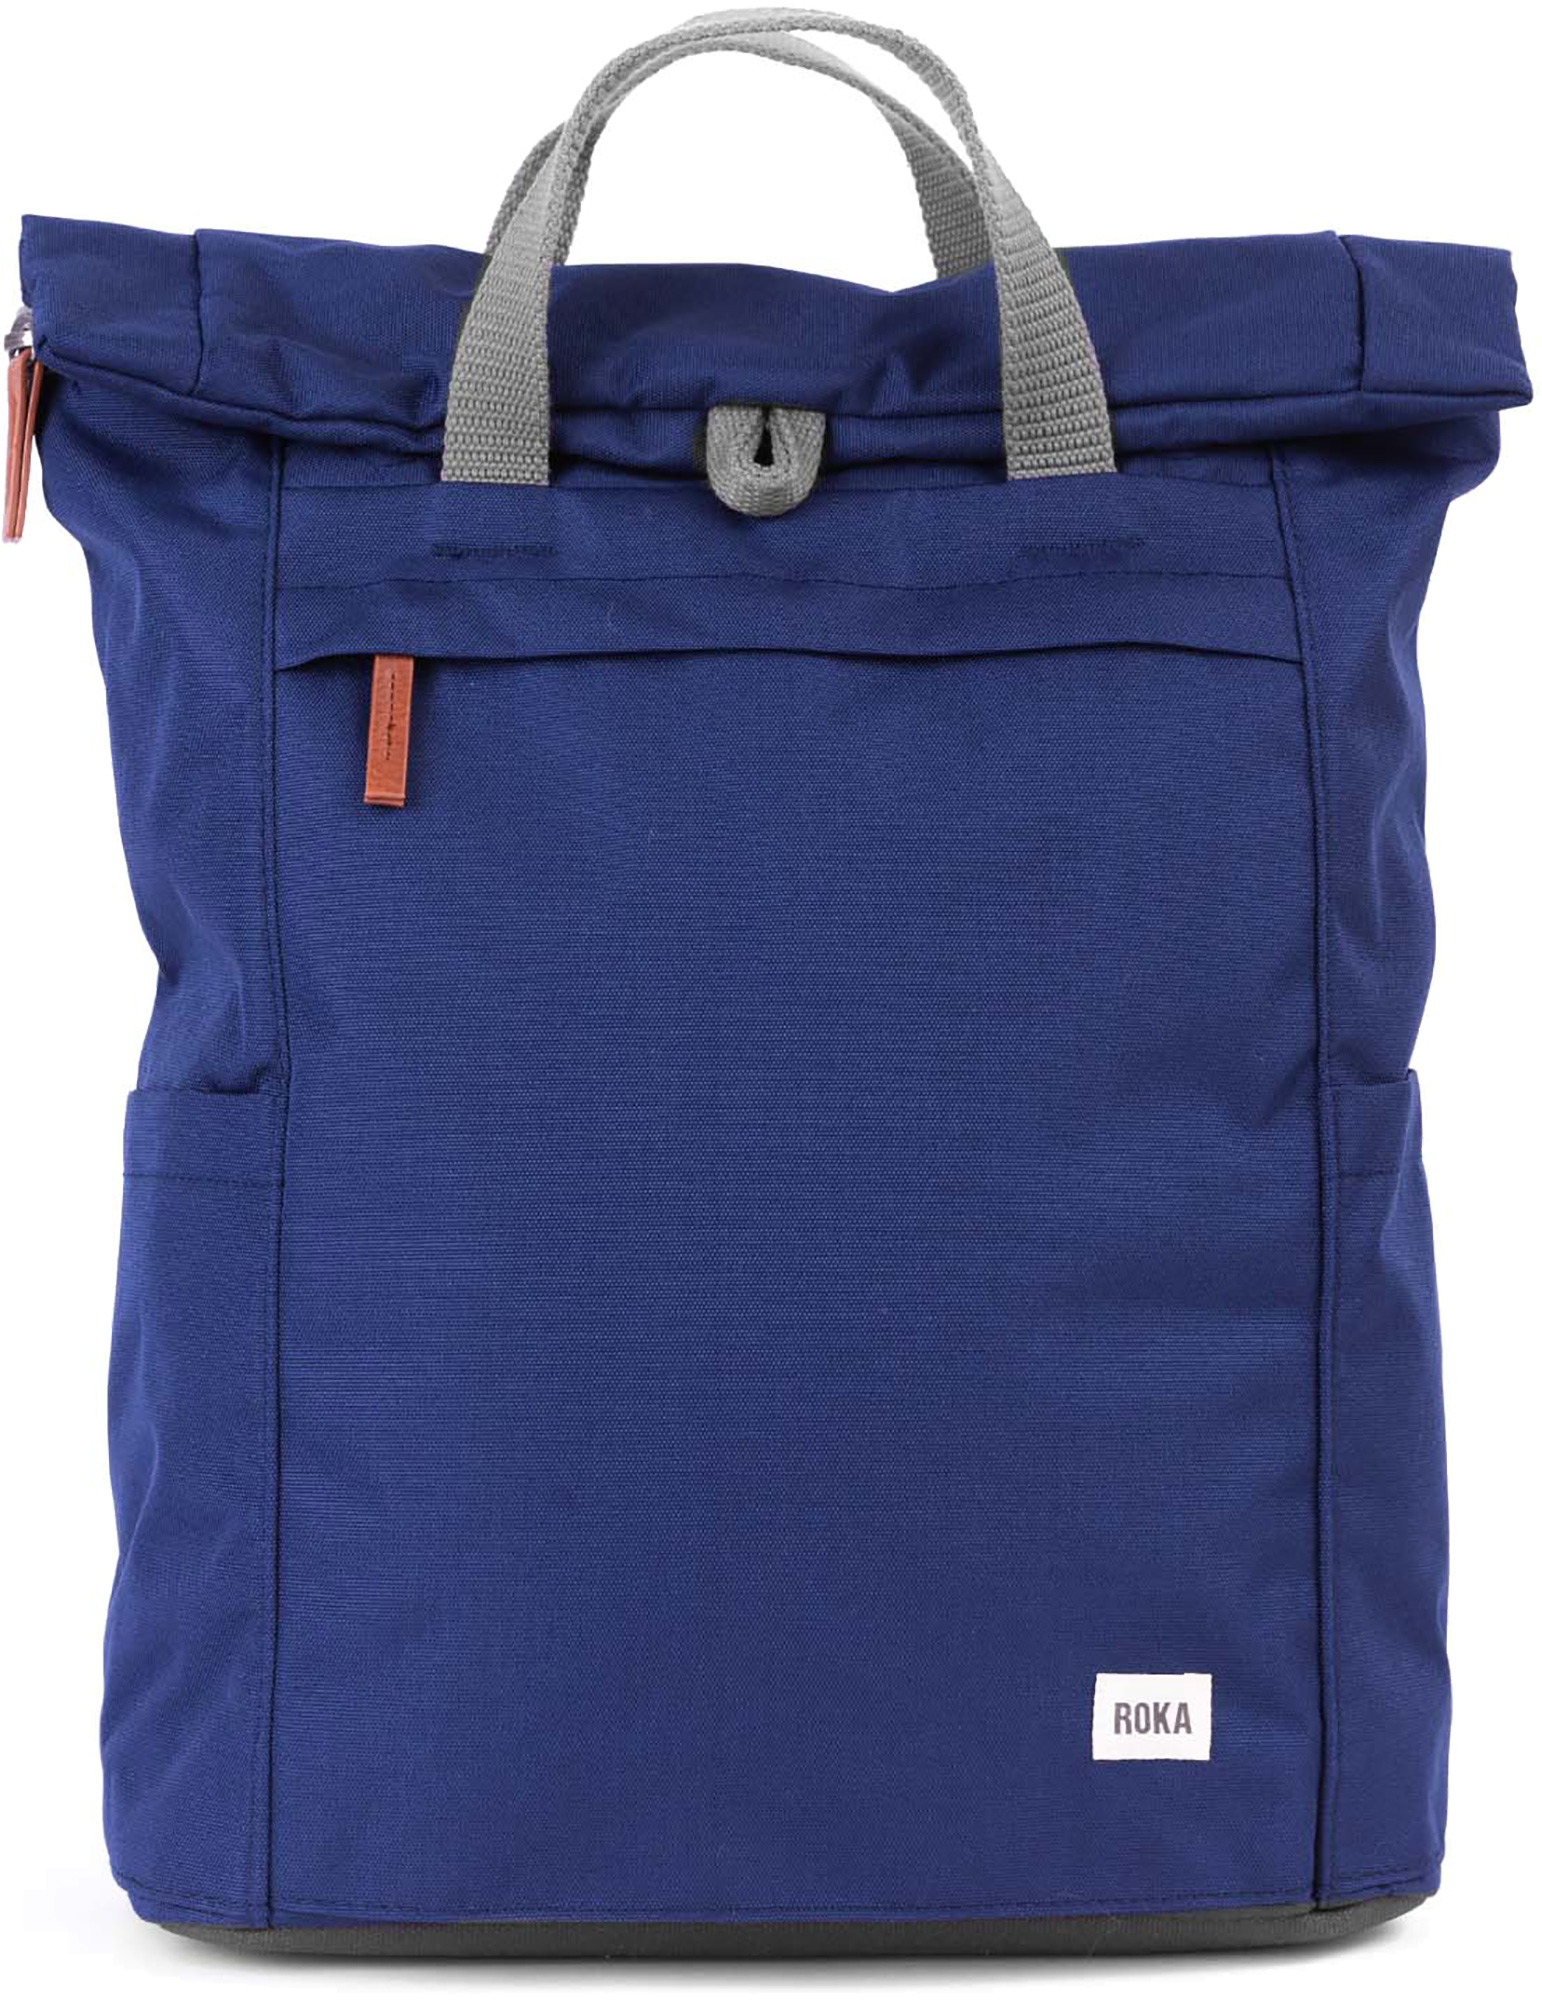 Roka Mineral Finchley A Sustainable Canvas Lrg size 20L